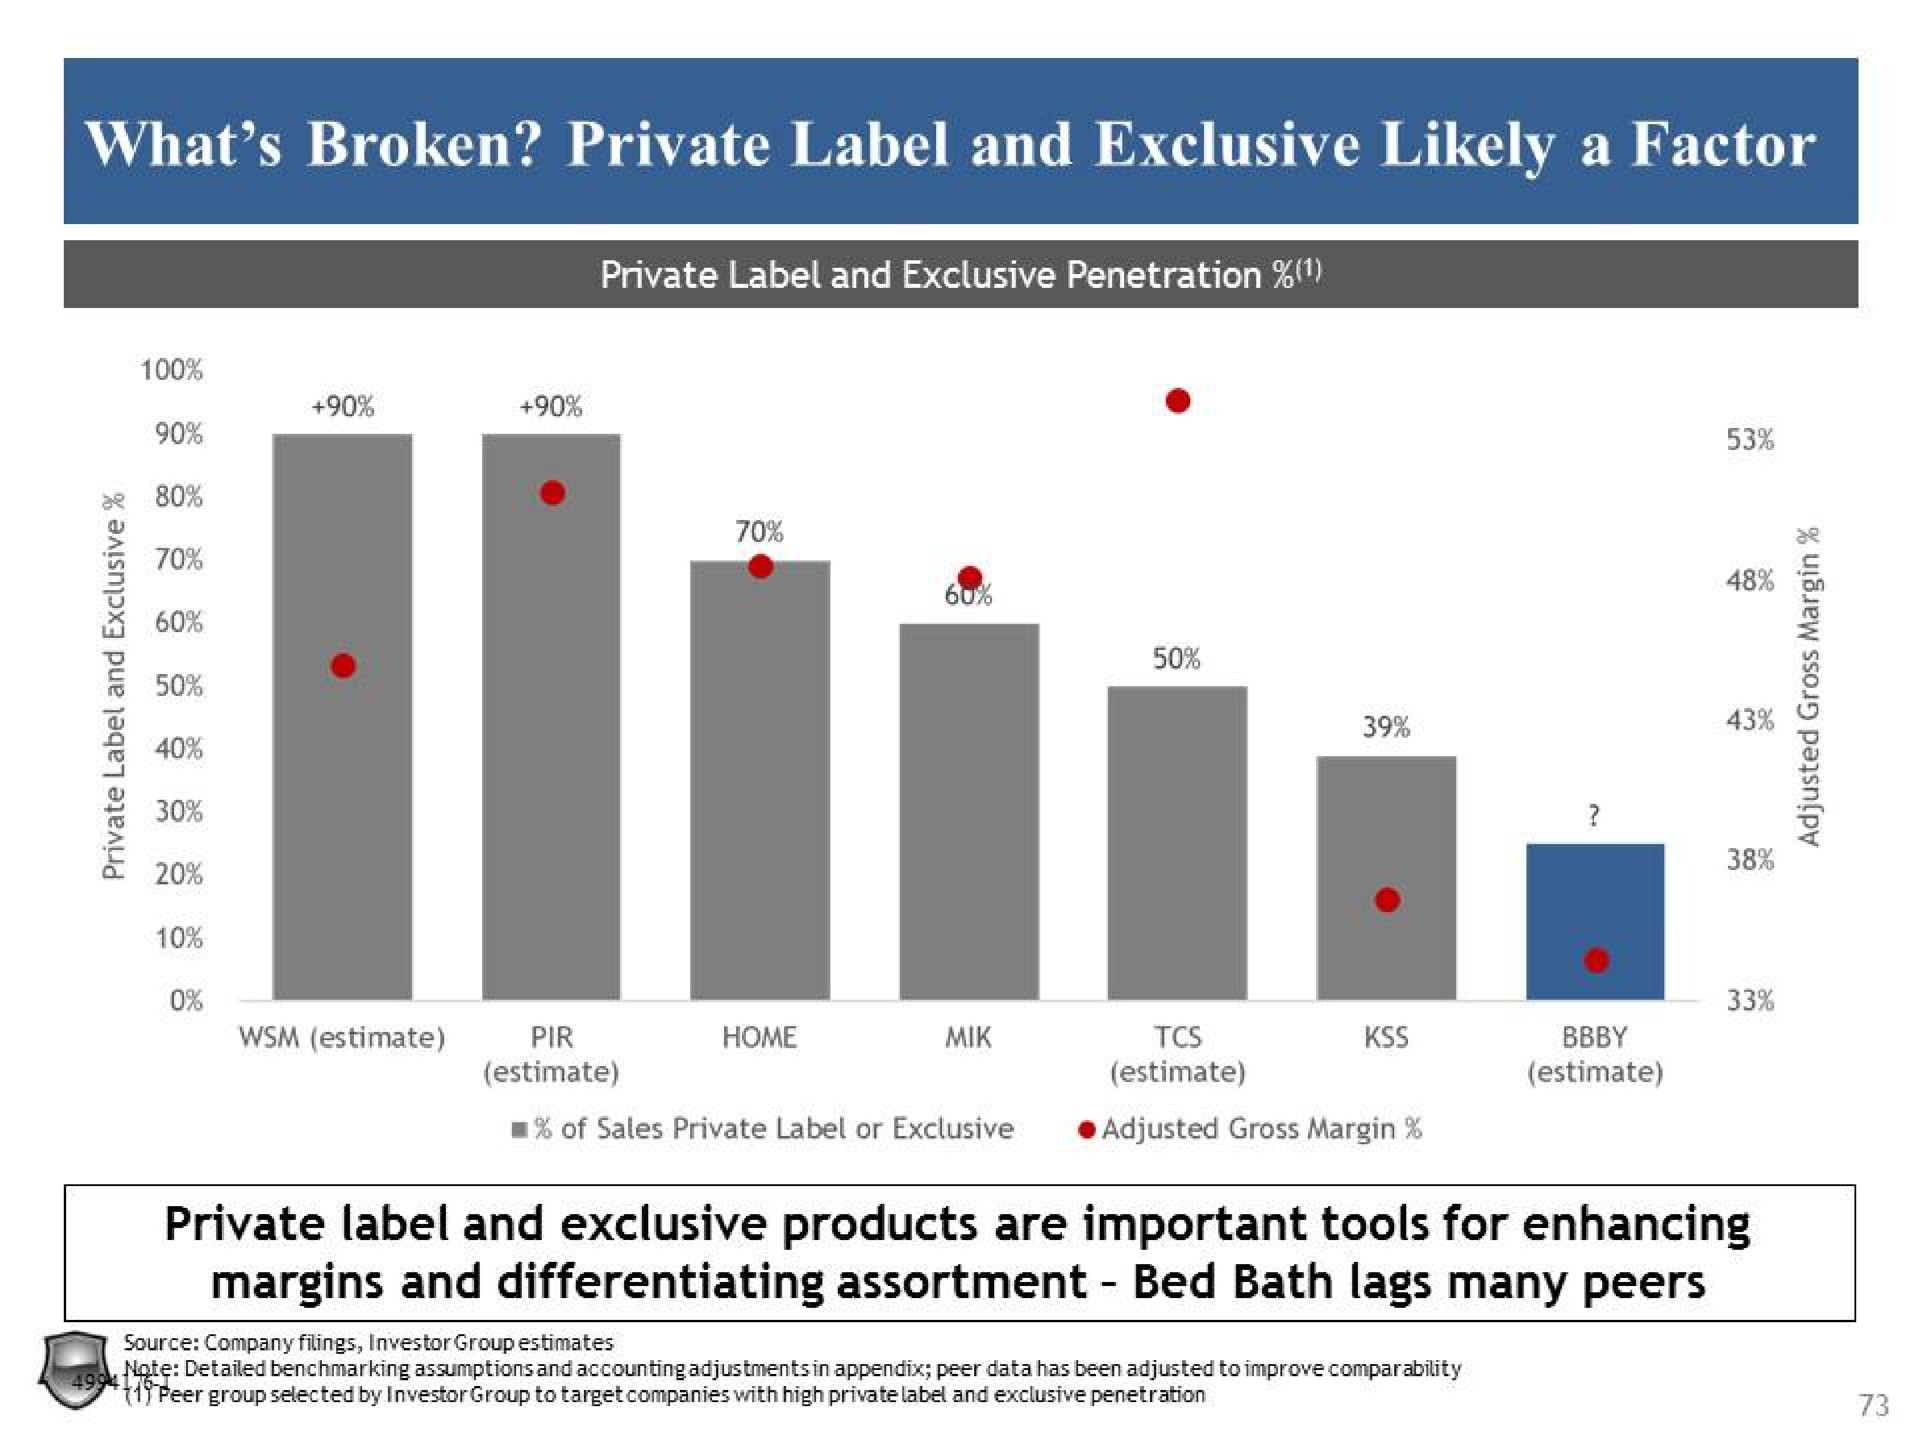 what broken private label and exclusive likely a factor private label and exclusive products are important tools for enhancing margins and differentiating assortment bed bath lags many peers | Legion Partners